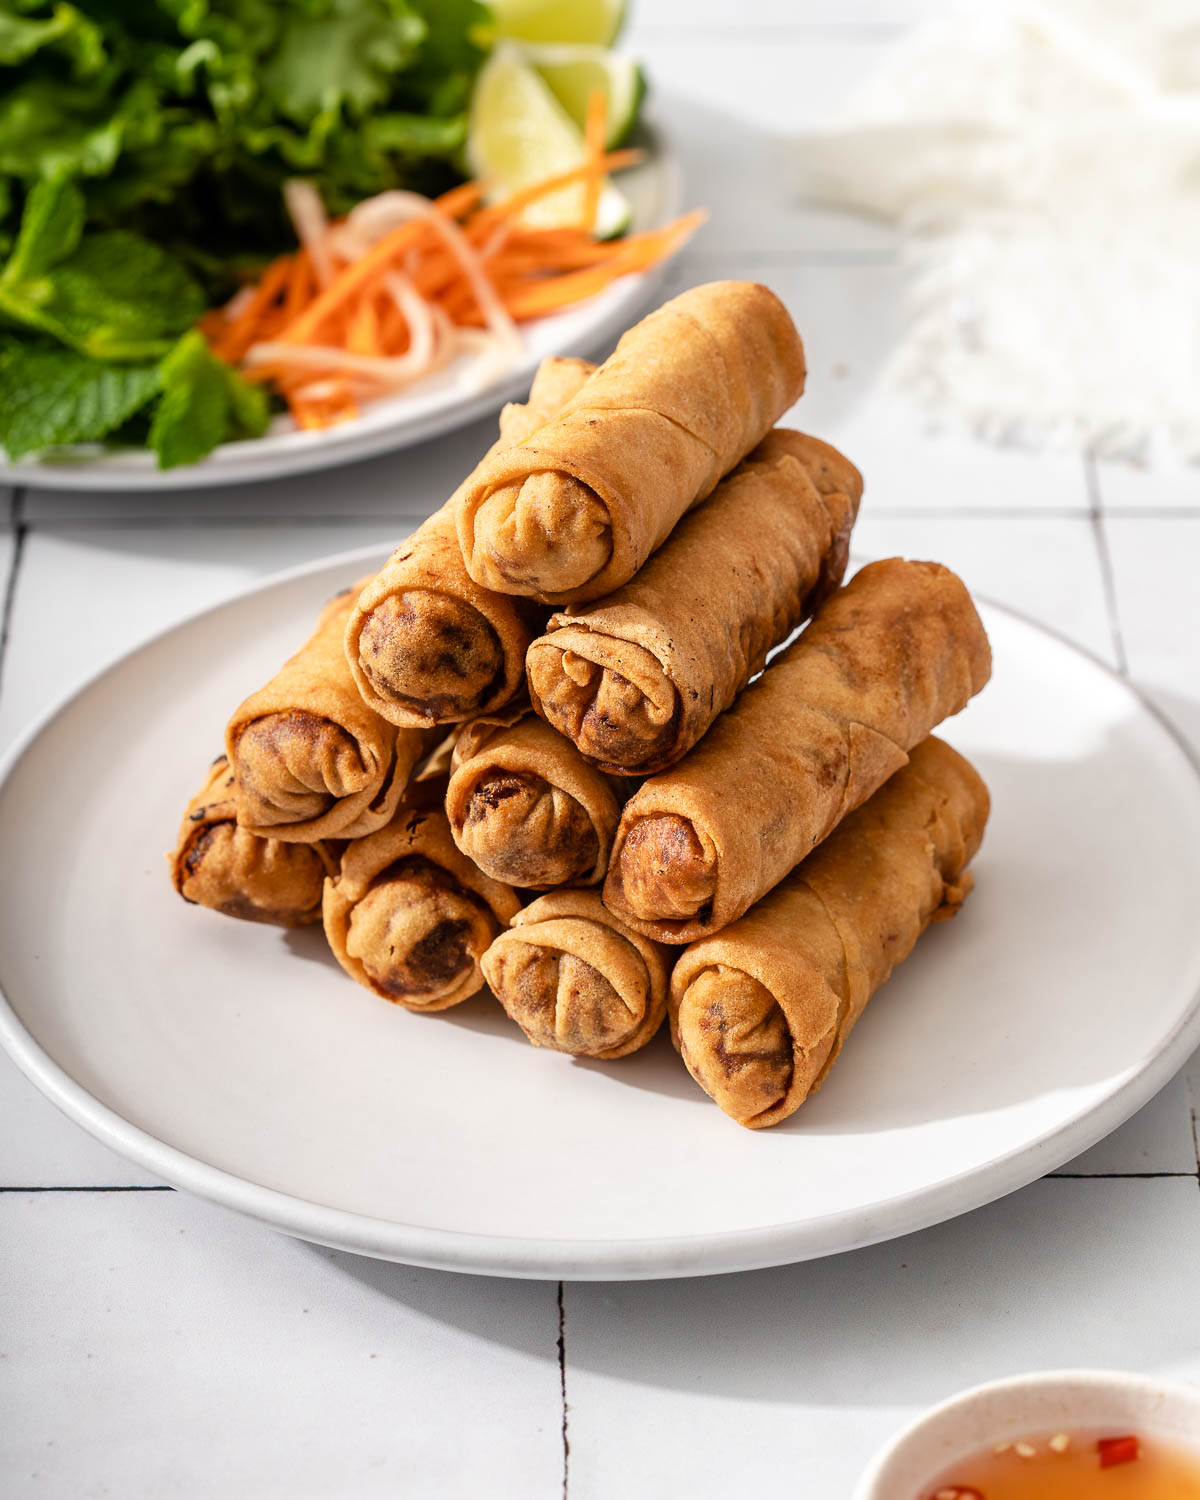 A plate with a stack of vietnamese egg rolls.